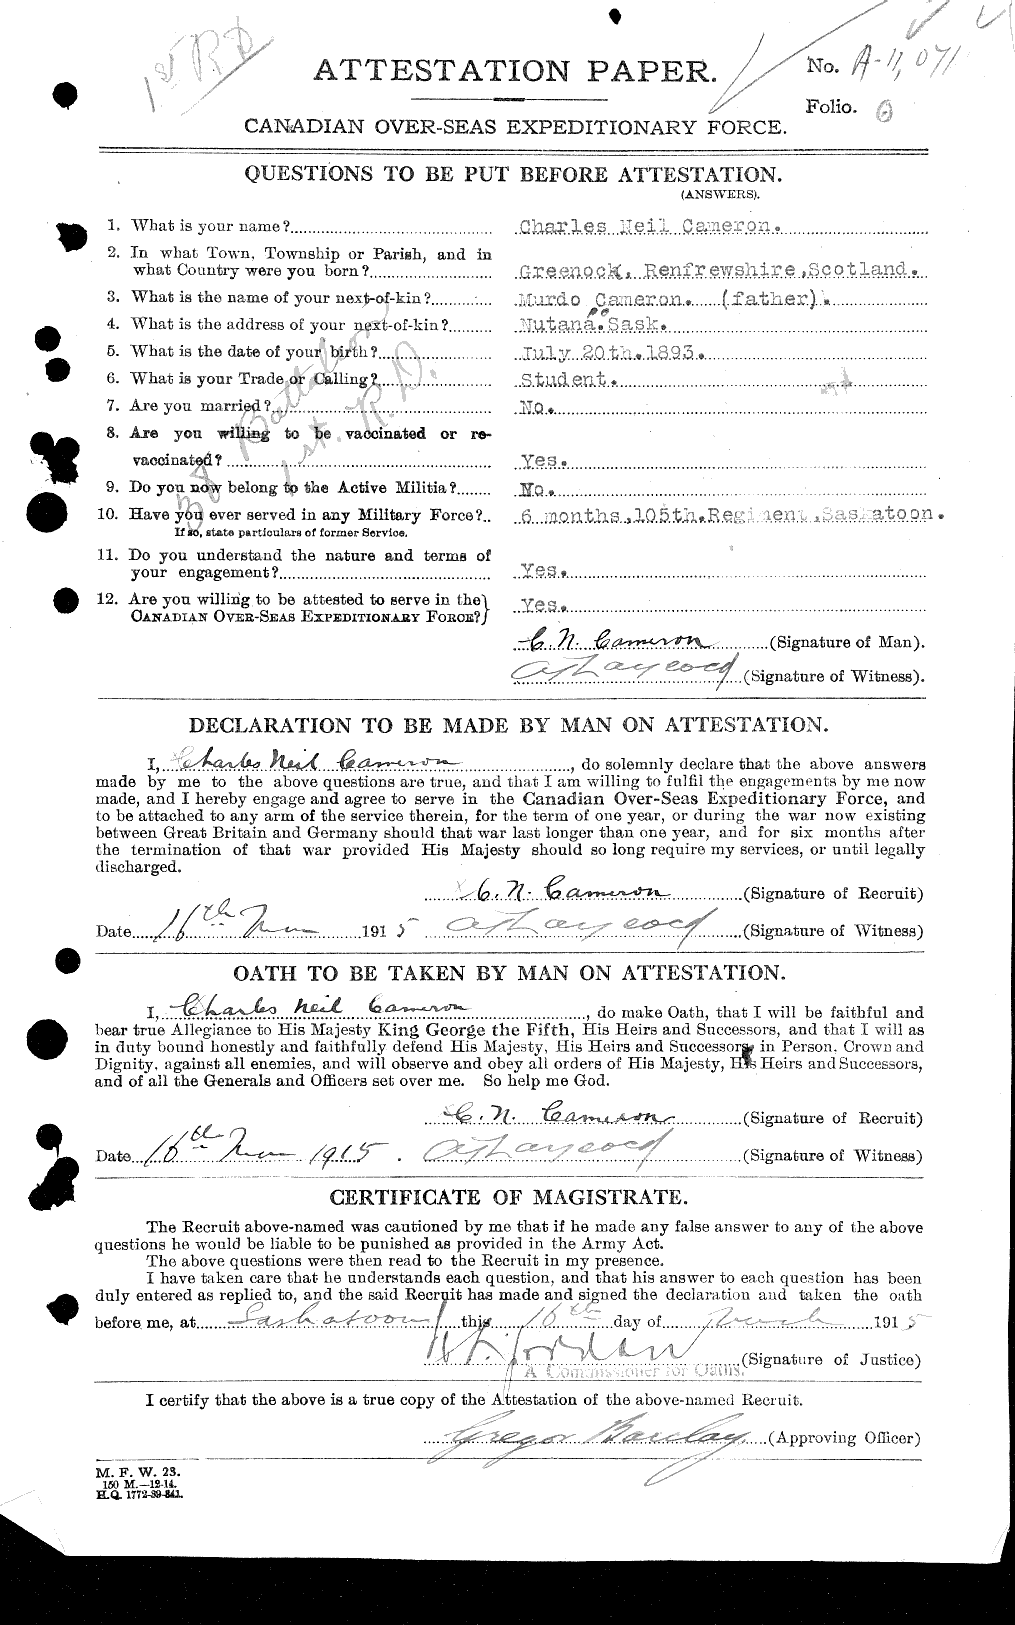 Personnel Records of the First World War - CEF 002616a